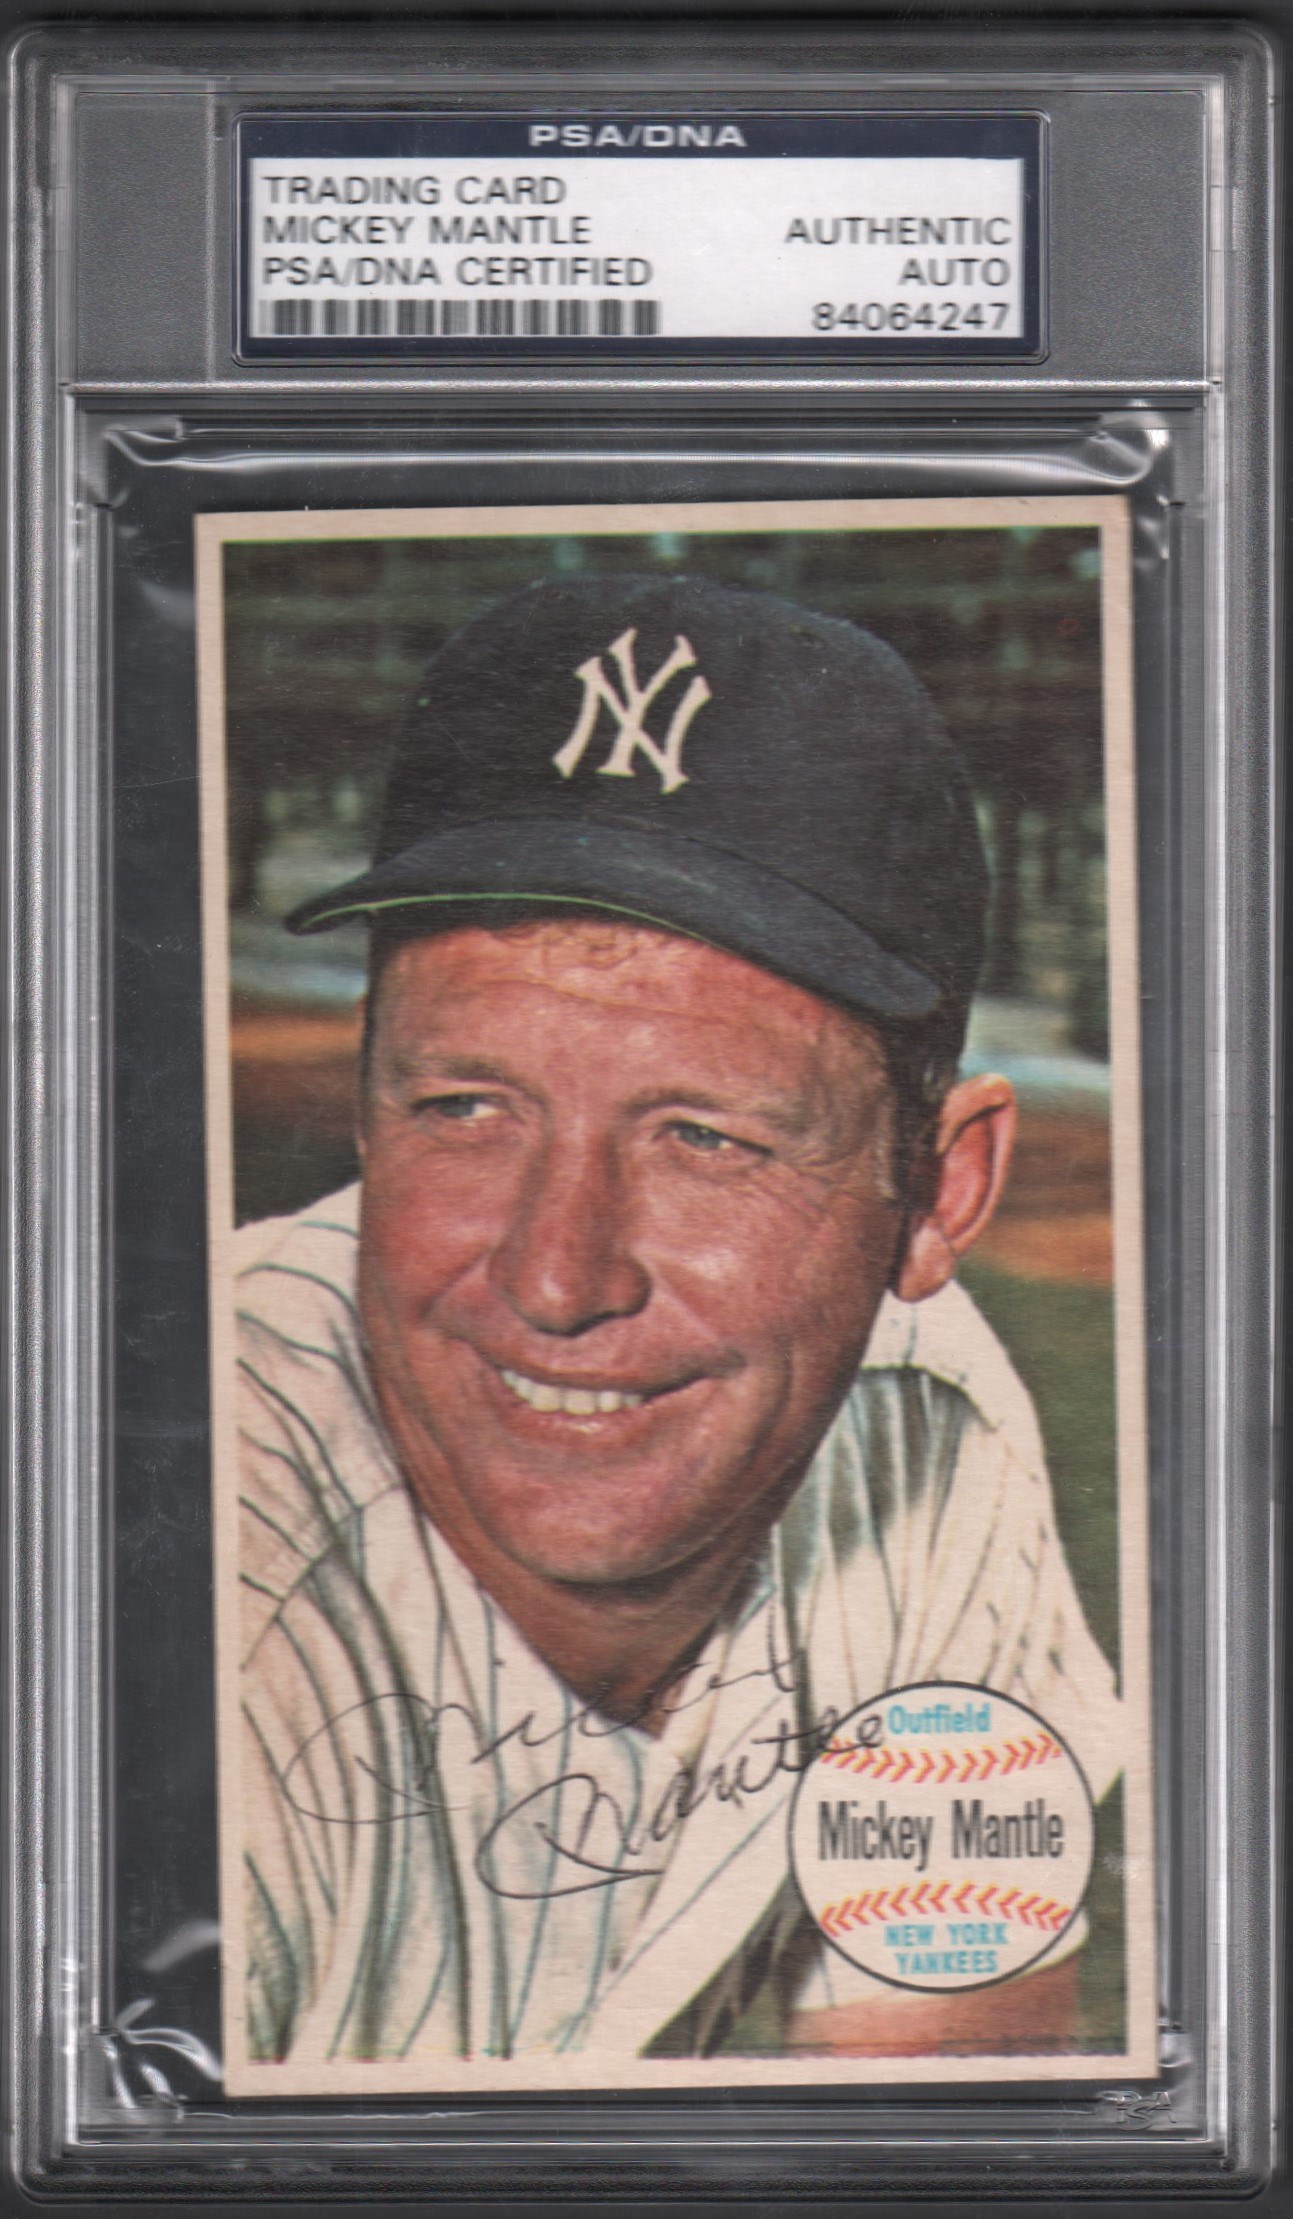 - 1964 Mickey Mantle Autographed Giants Card (PSA)